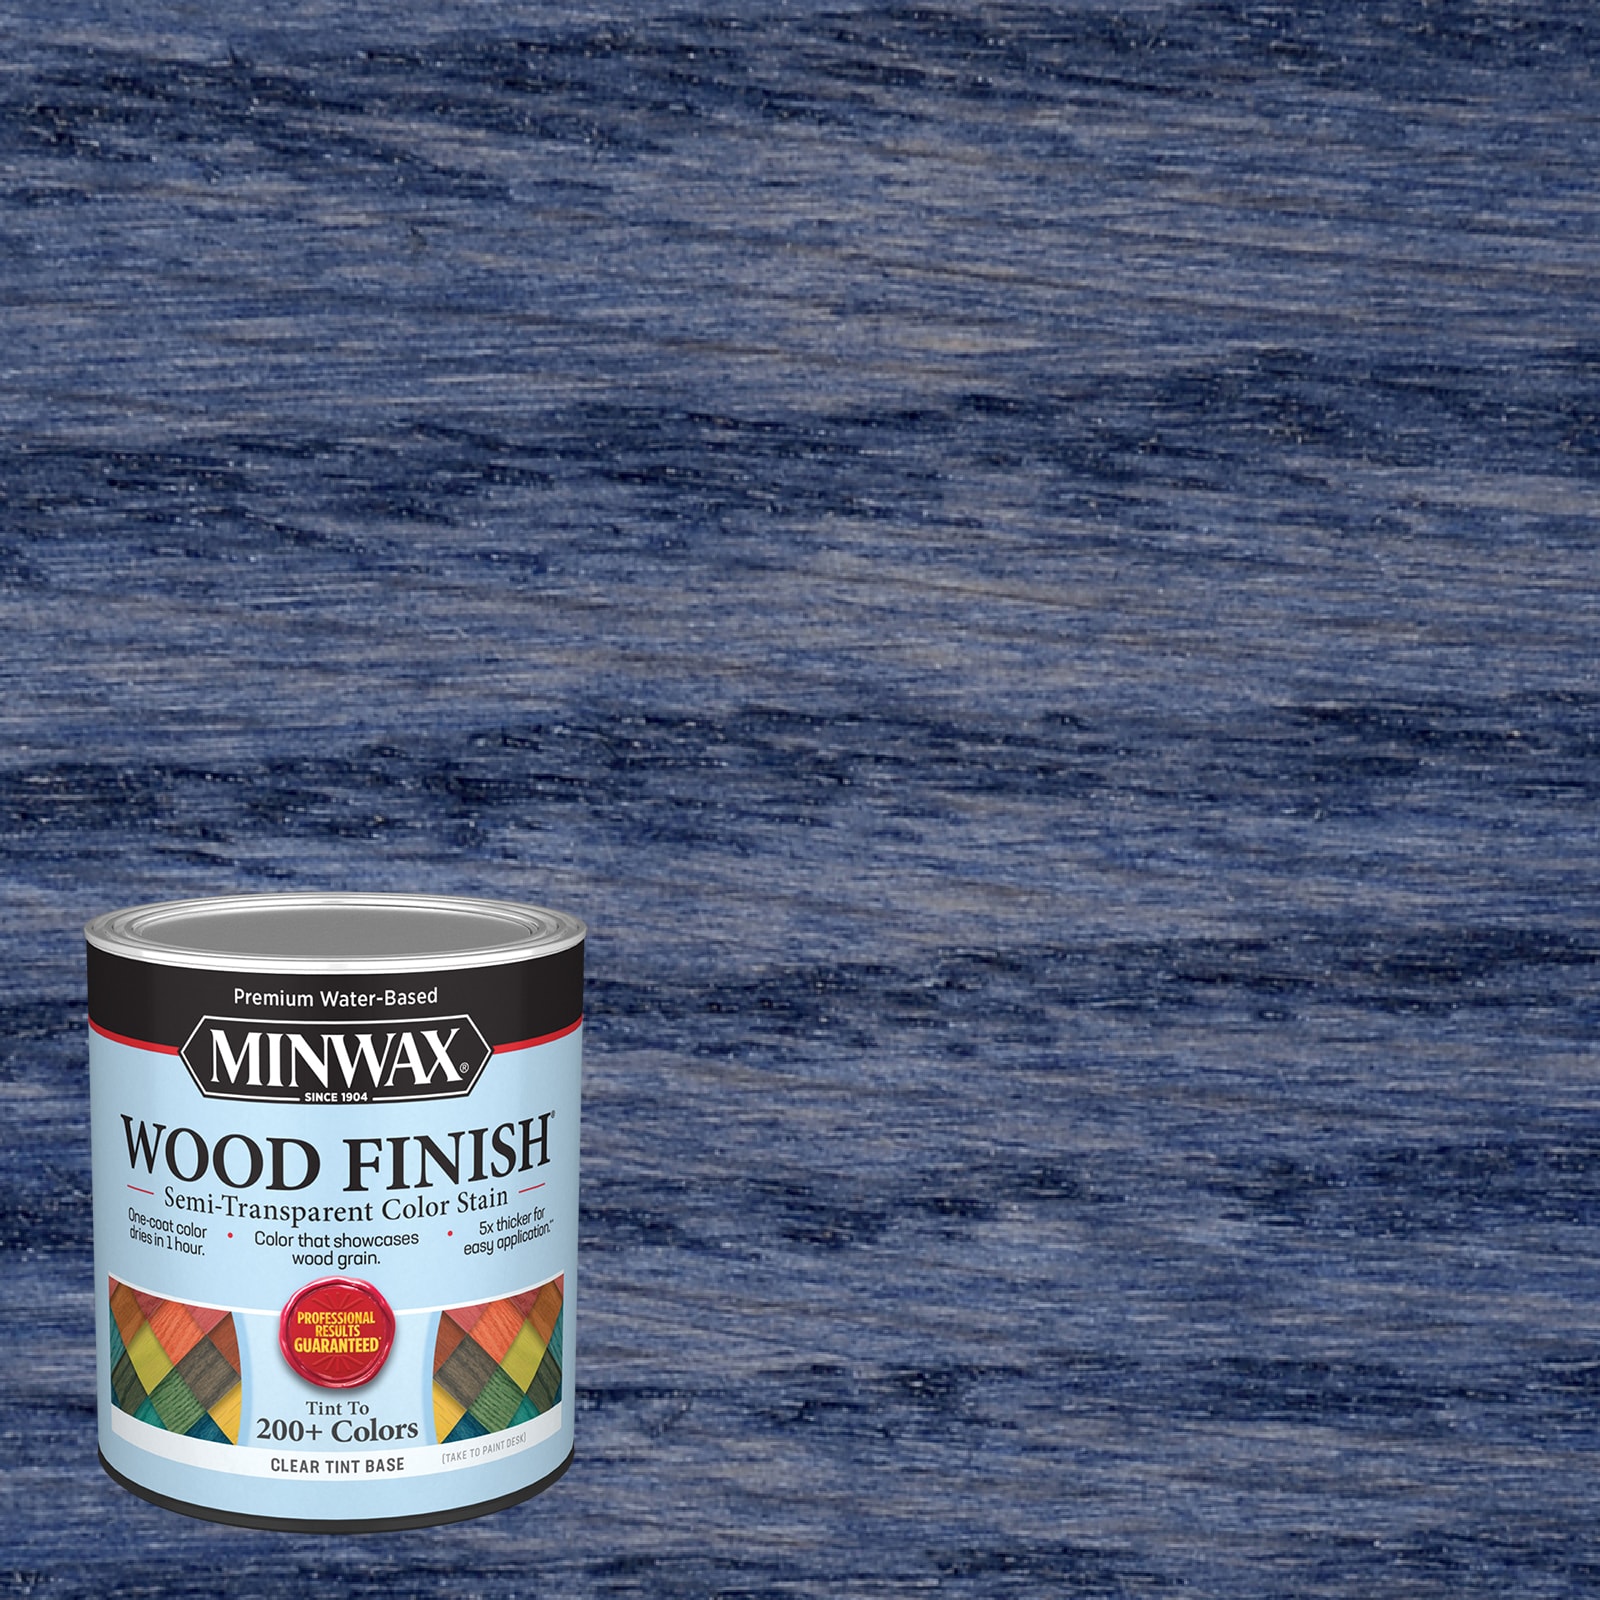 Minwax Wood Finish Water-Based Crimson Mw1147 Solid Interior Stain